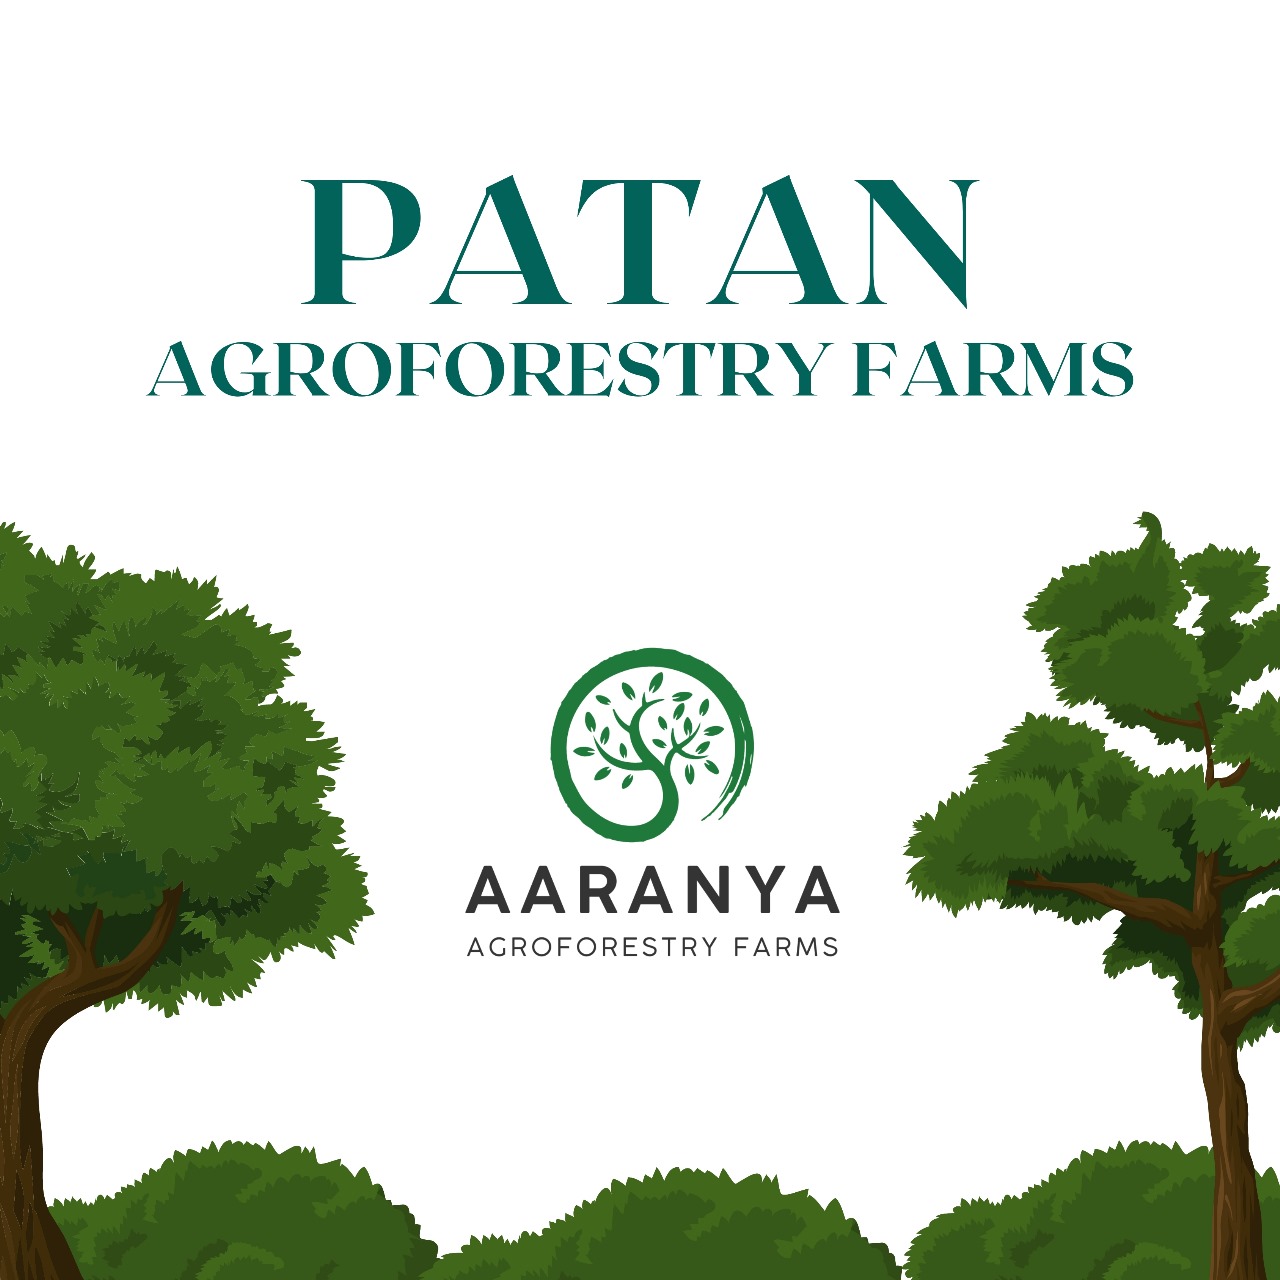 PATAN Agroforestry